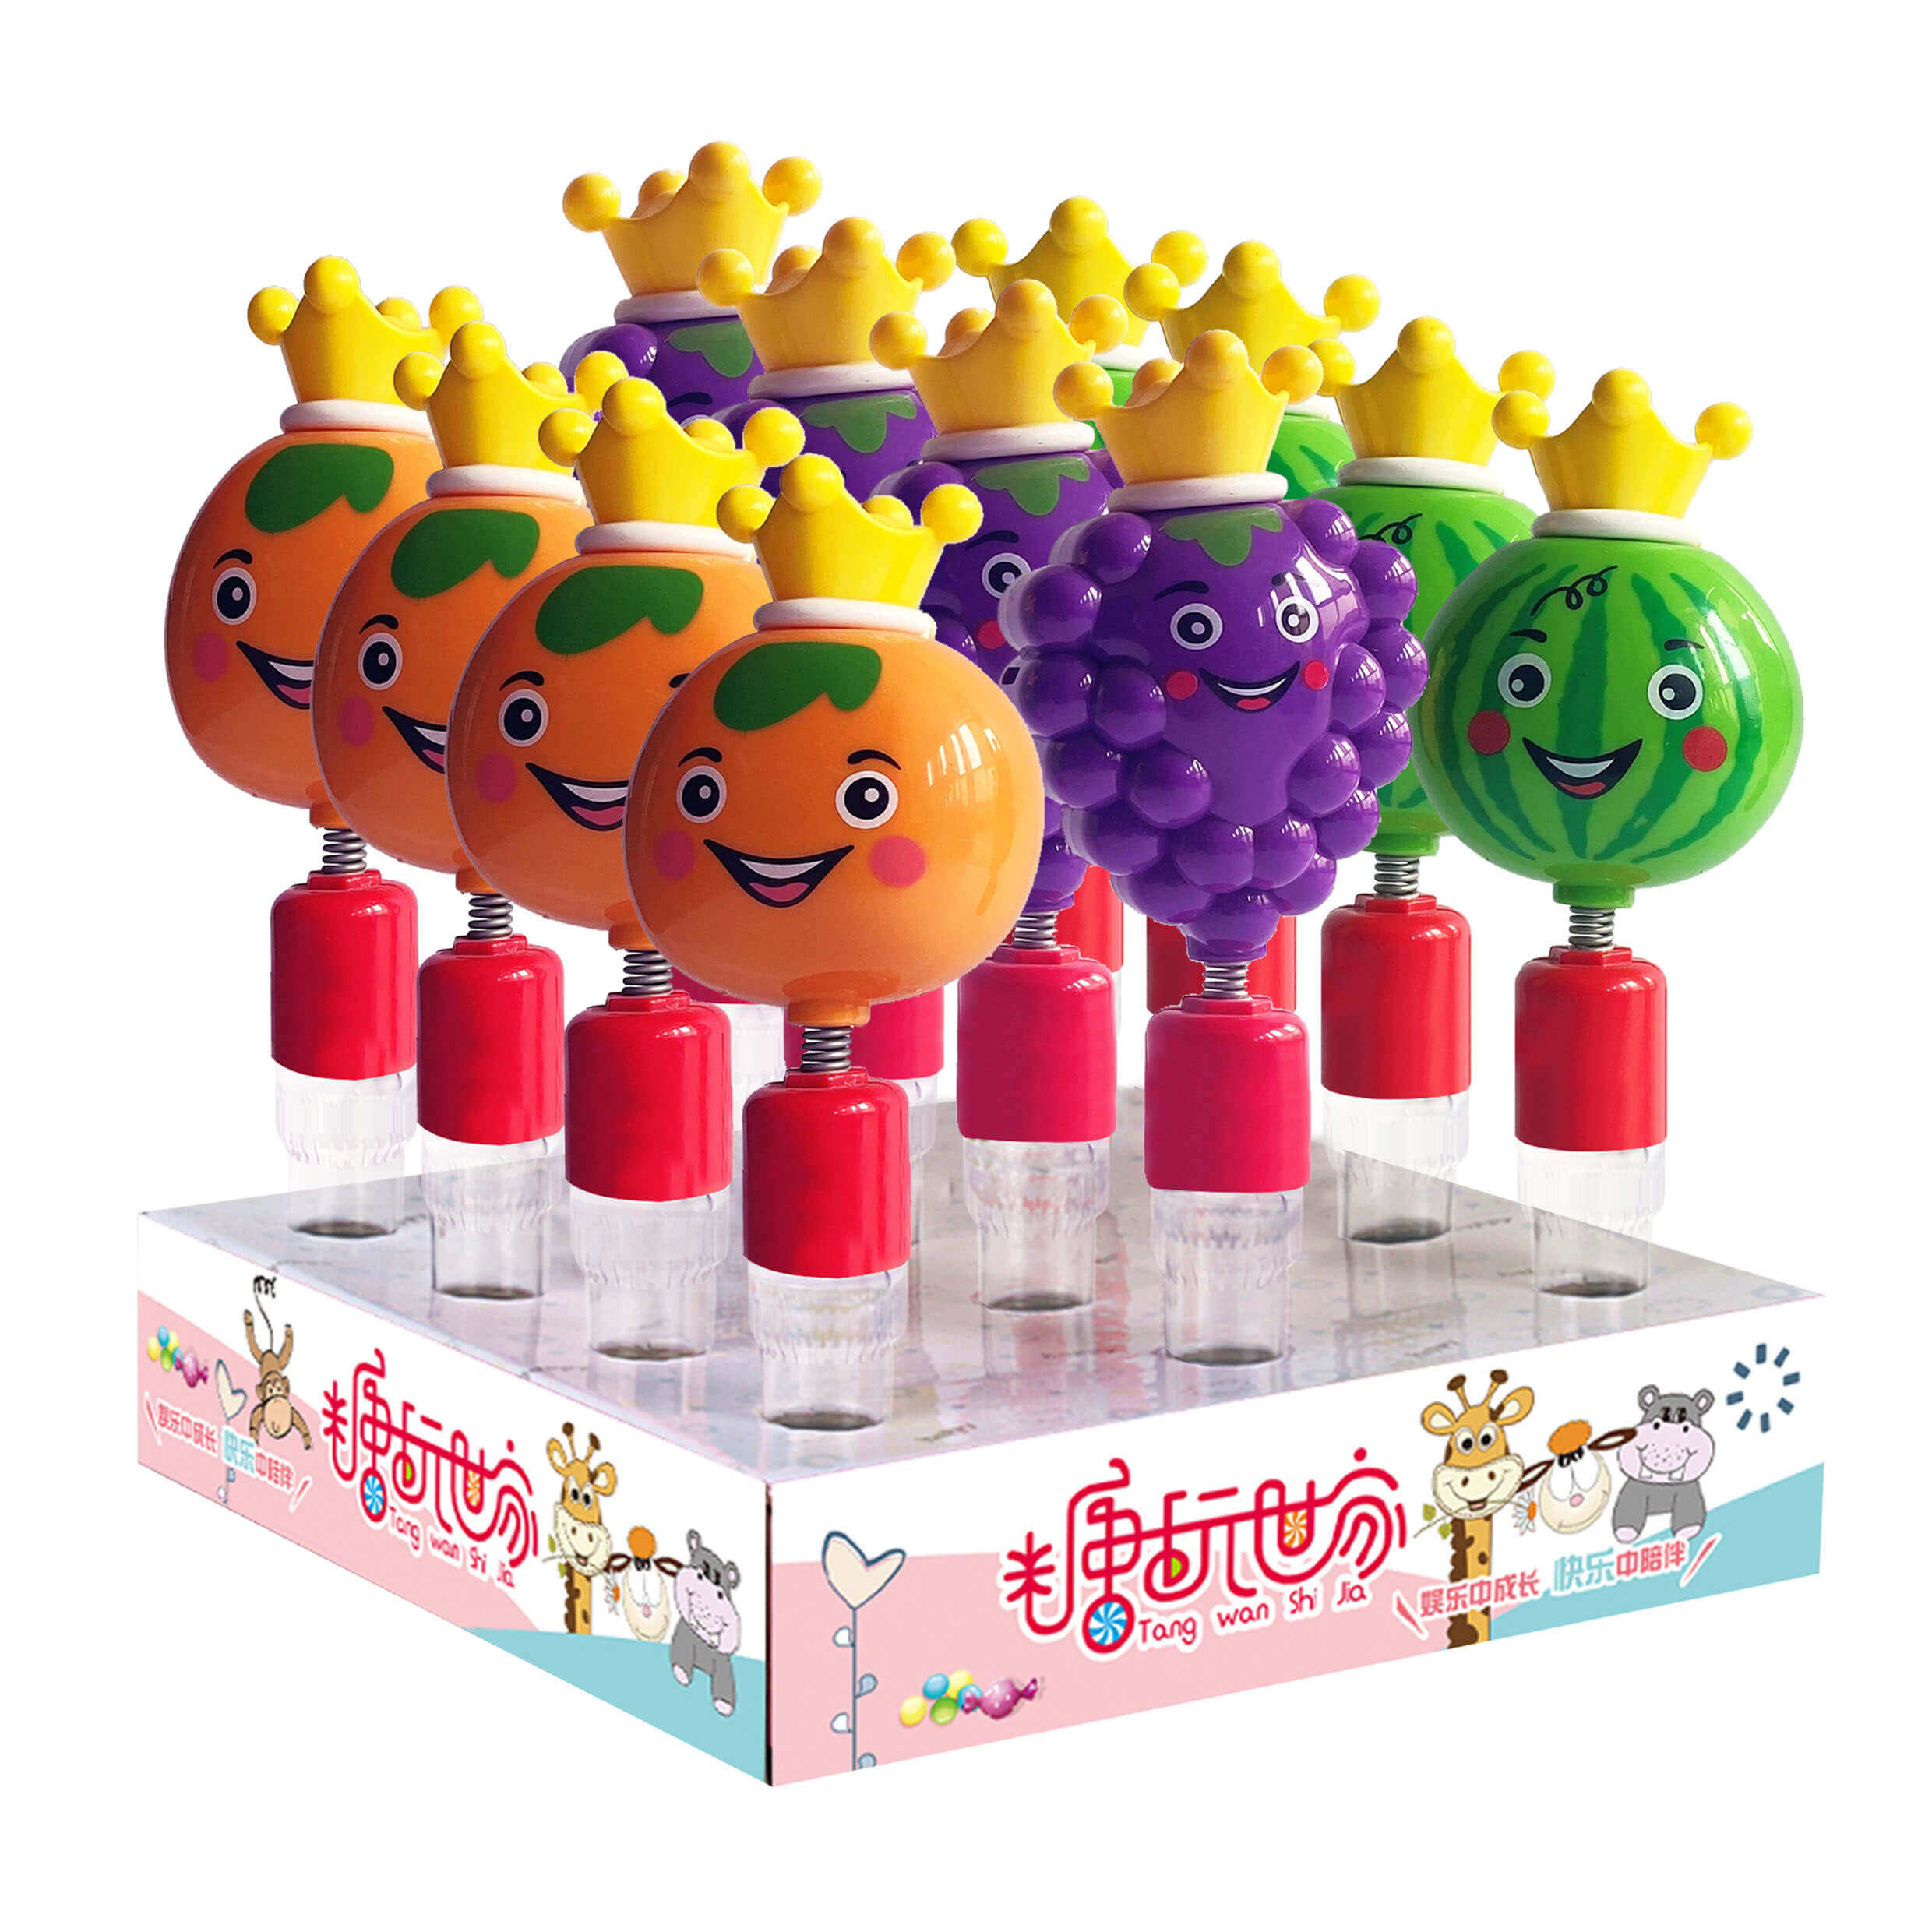 candy dispenser designs, candy kids toys, plastic candy toys